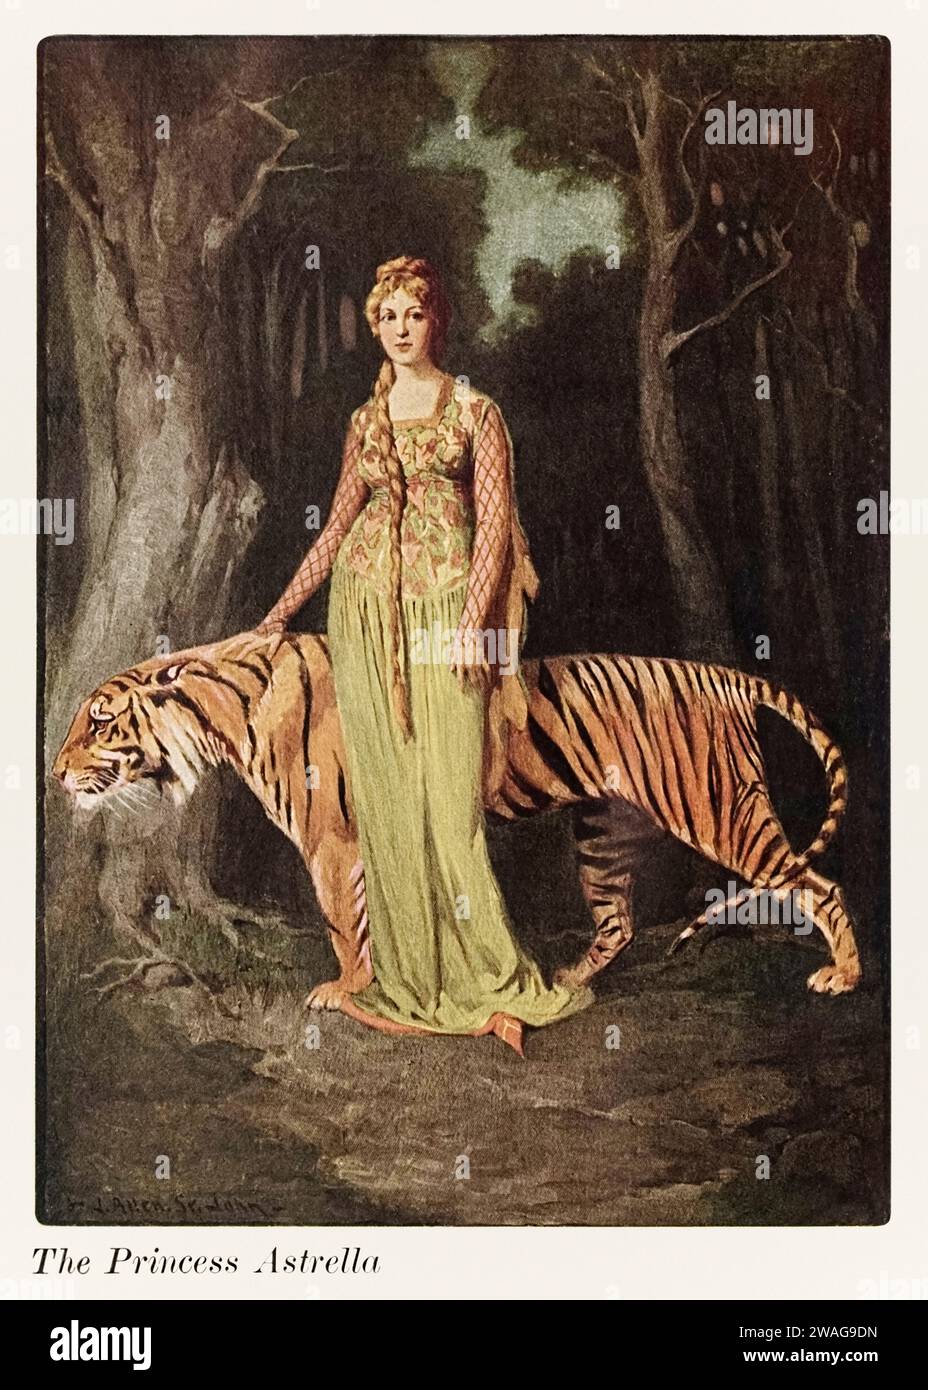 ‘The Princess Astrella’ frontispiece from ‘The Face in the Pool: A Faerie Tale’ written and illustrated by J. Allen St. John (1872-1957). Photograph from a 1905 first edition published by A. C. McClurg & Co., Chicago. Credit: Private Collection / AF Fotografie Stock Photo